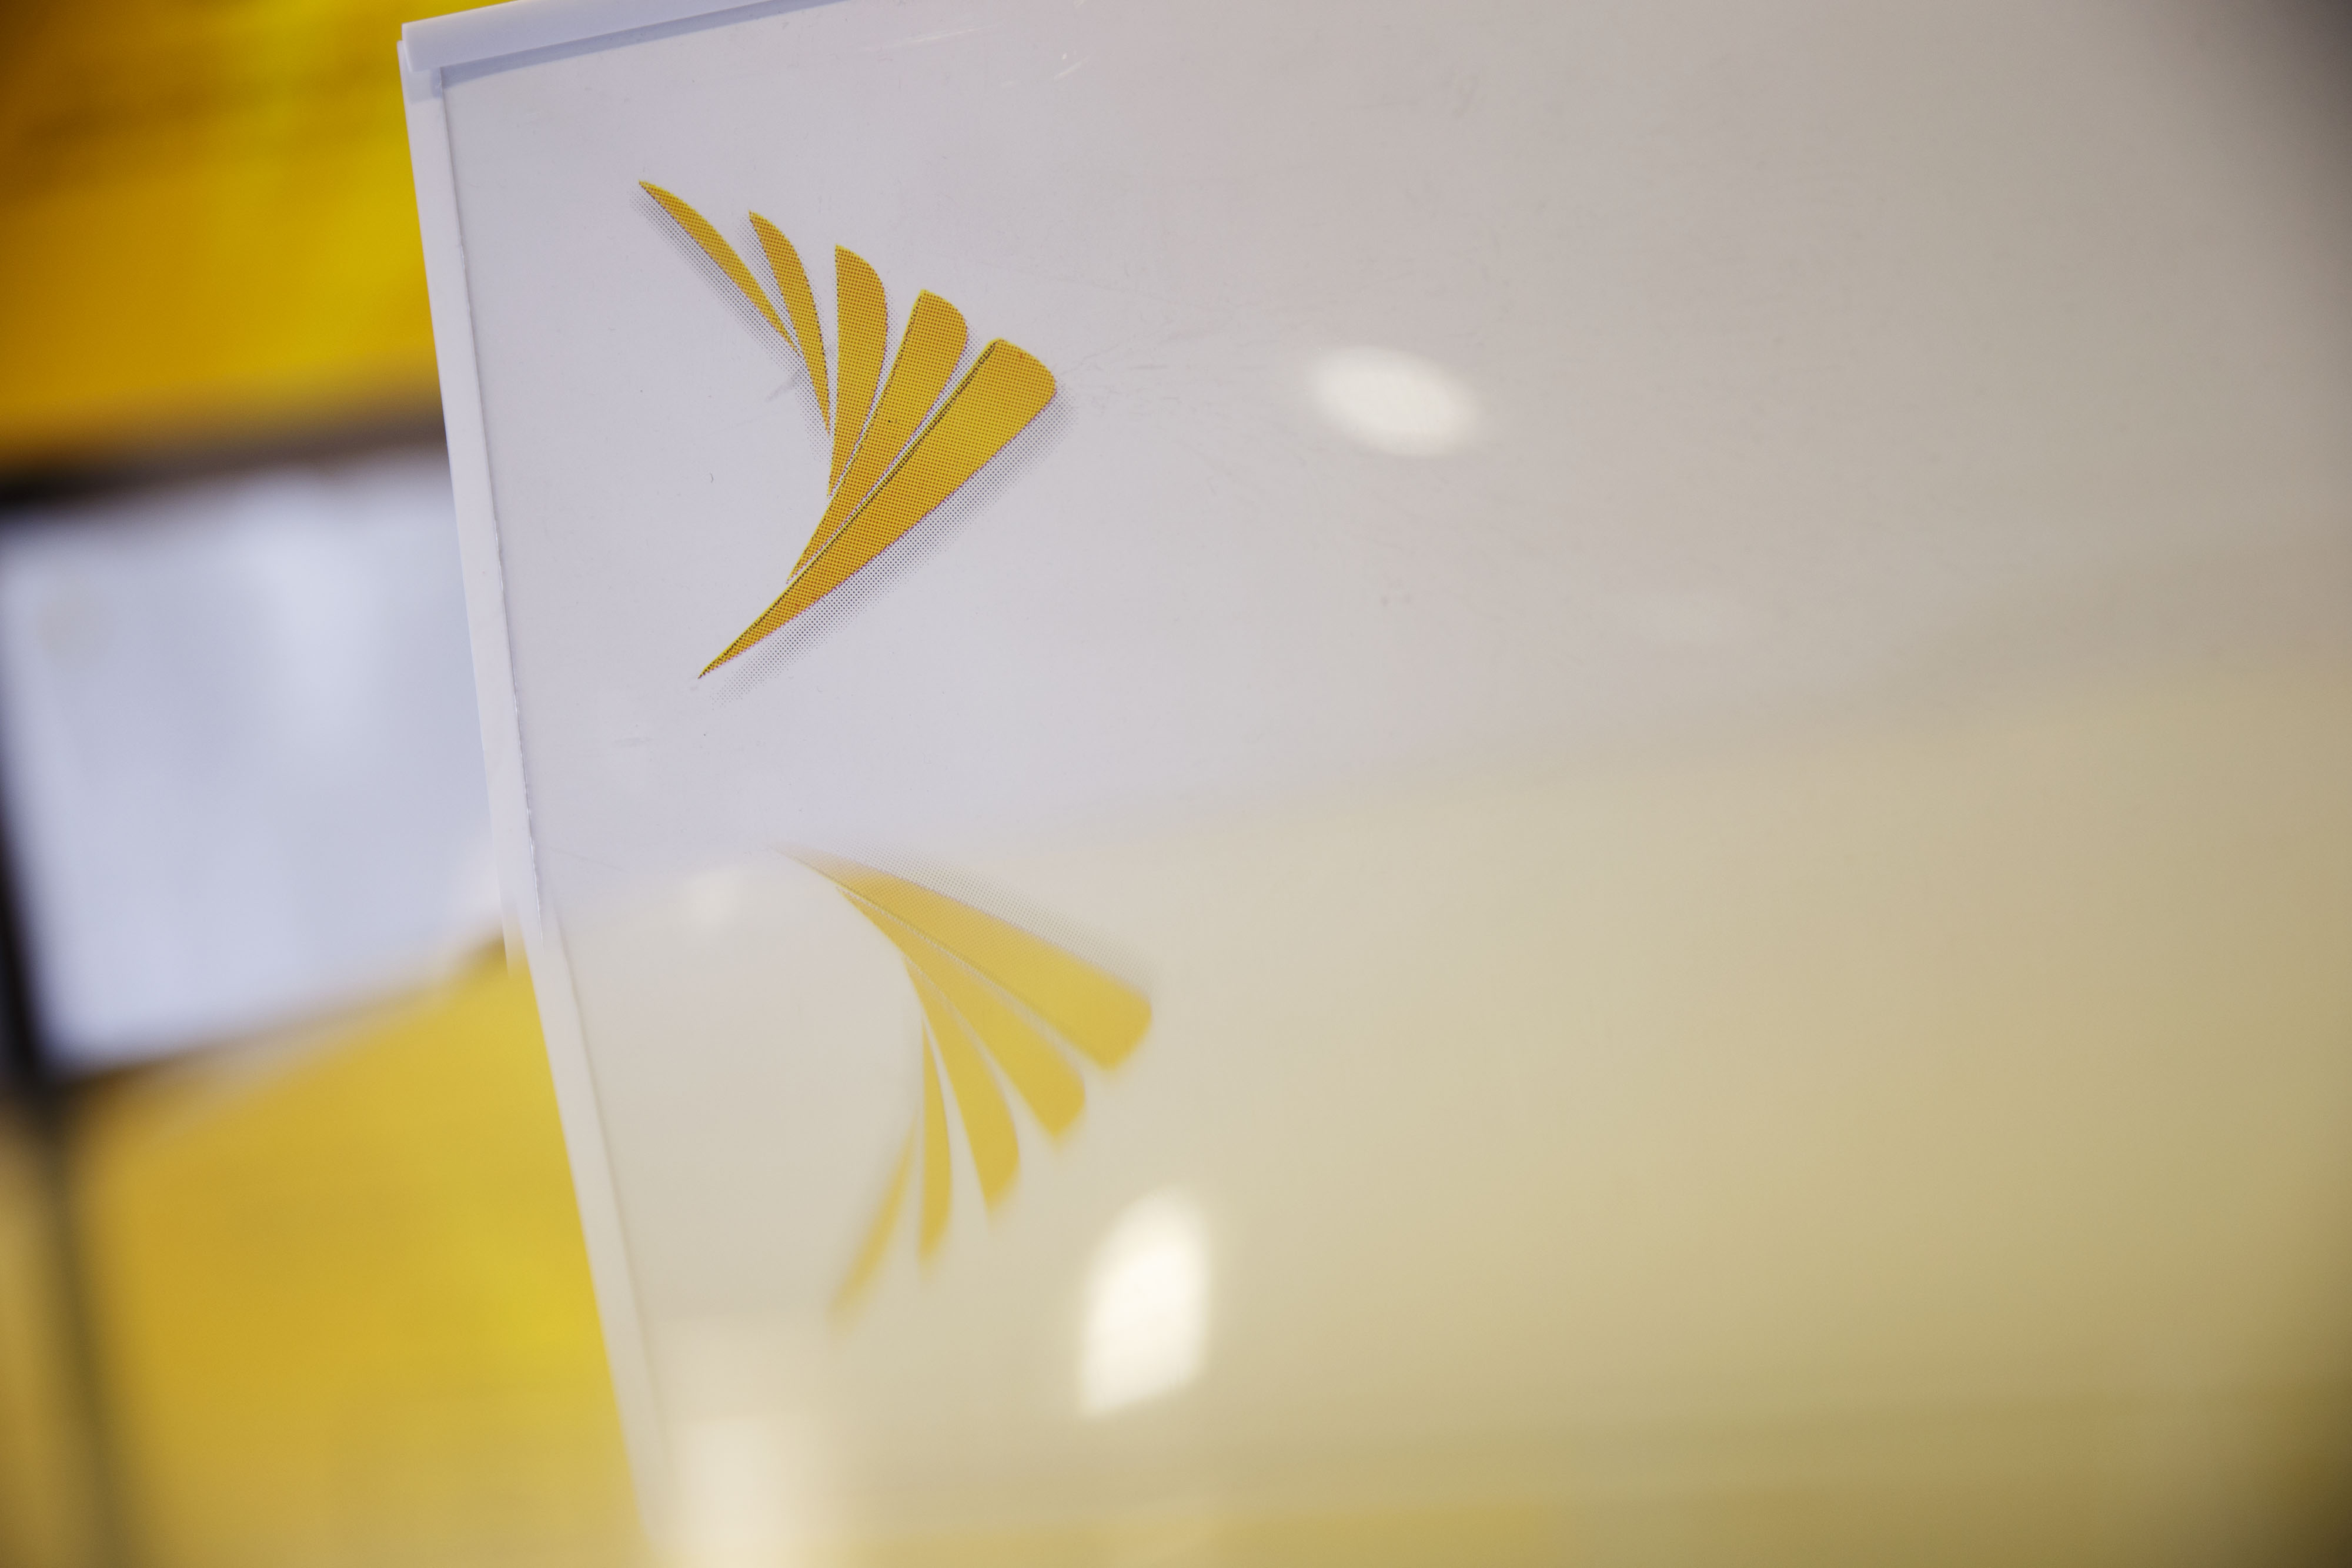 Sprint seeks merger with cable giant Charter, report says